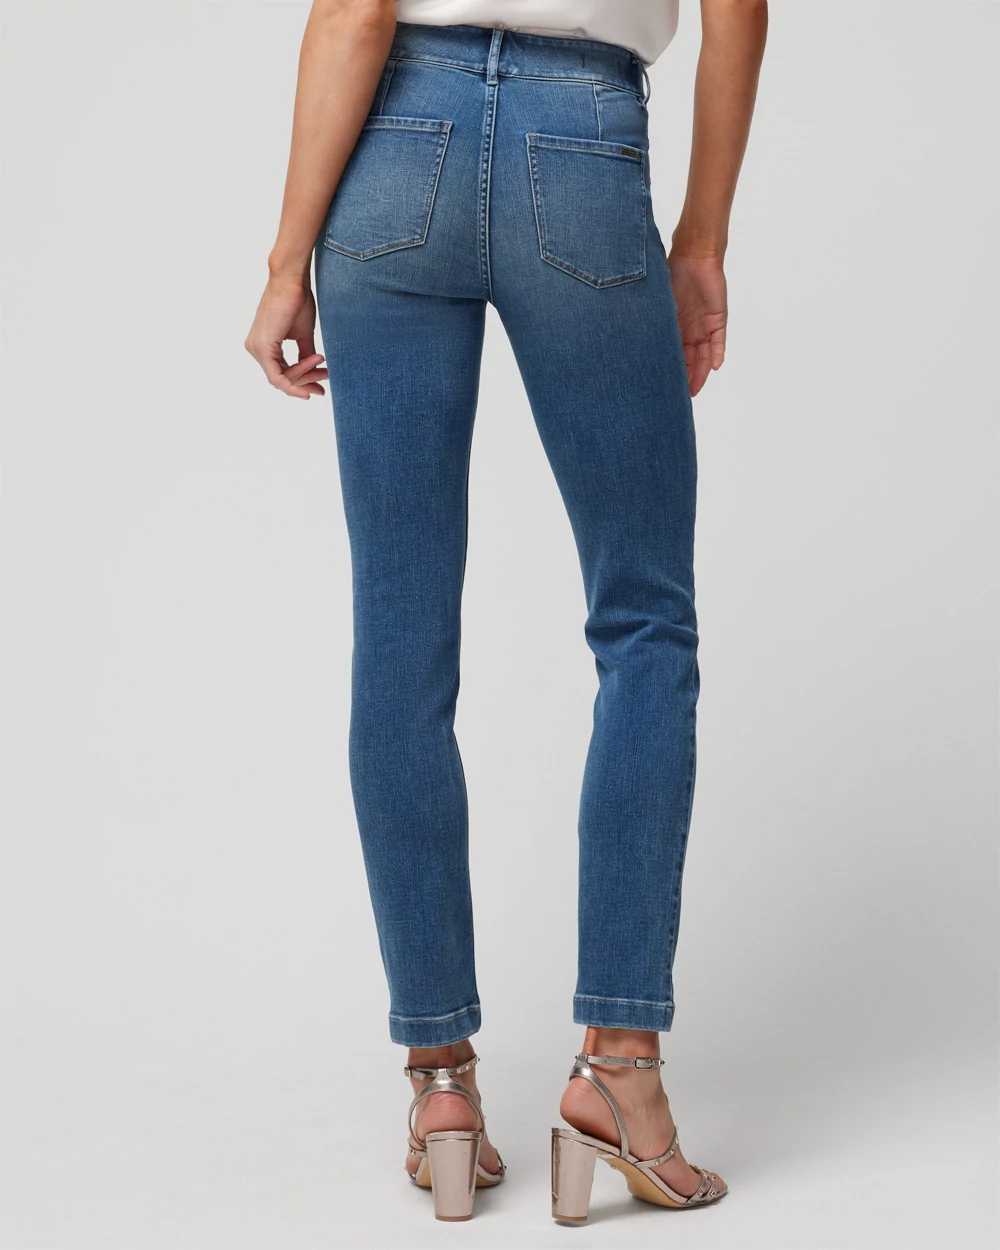 High-Rise Everyday Soft Horsebit Slim Ankle Jeans click to view larger image.